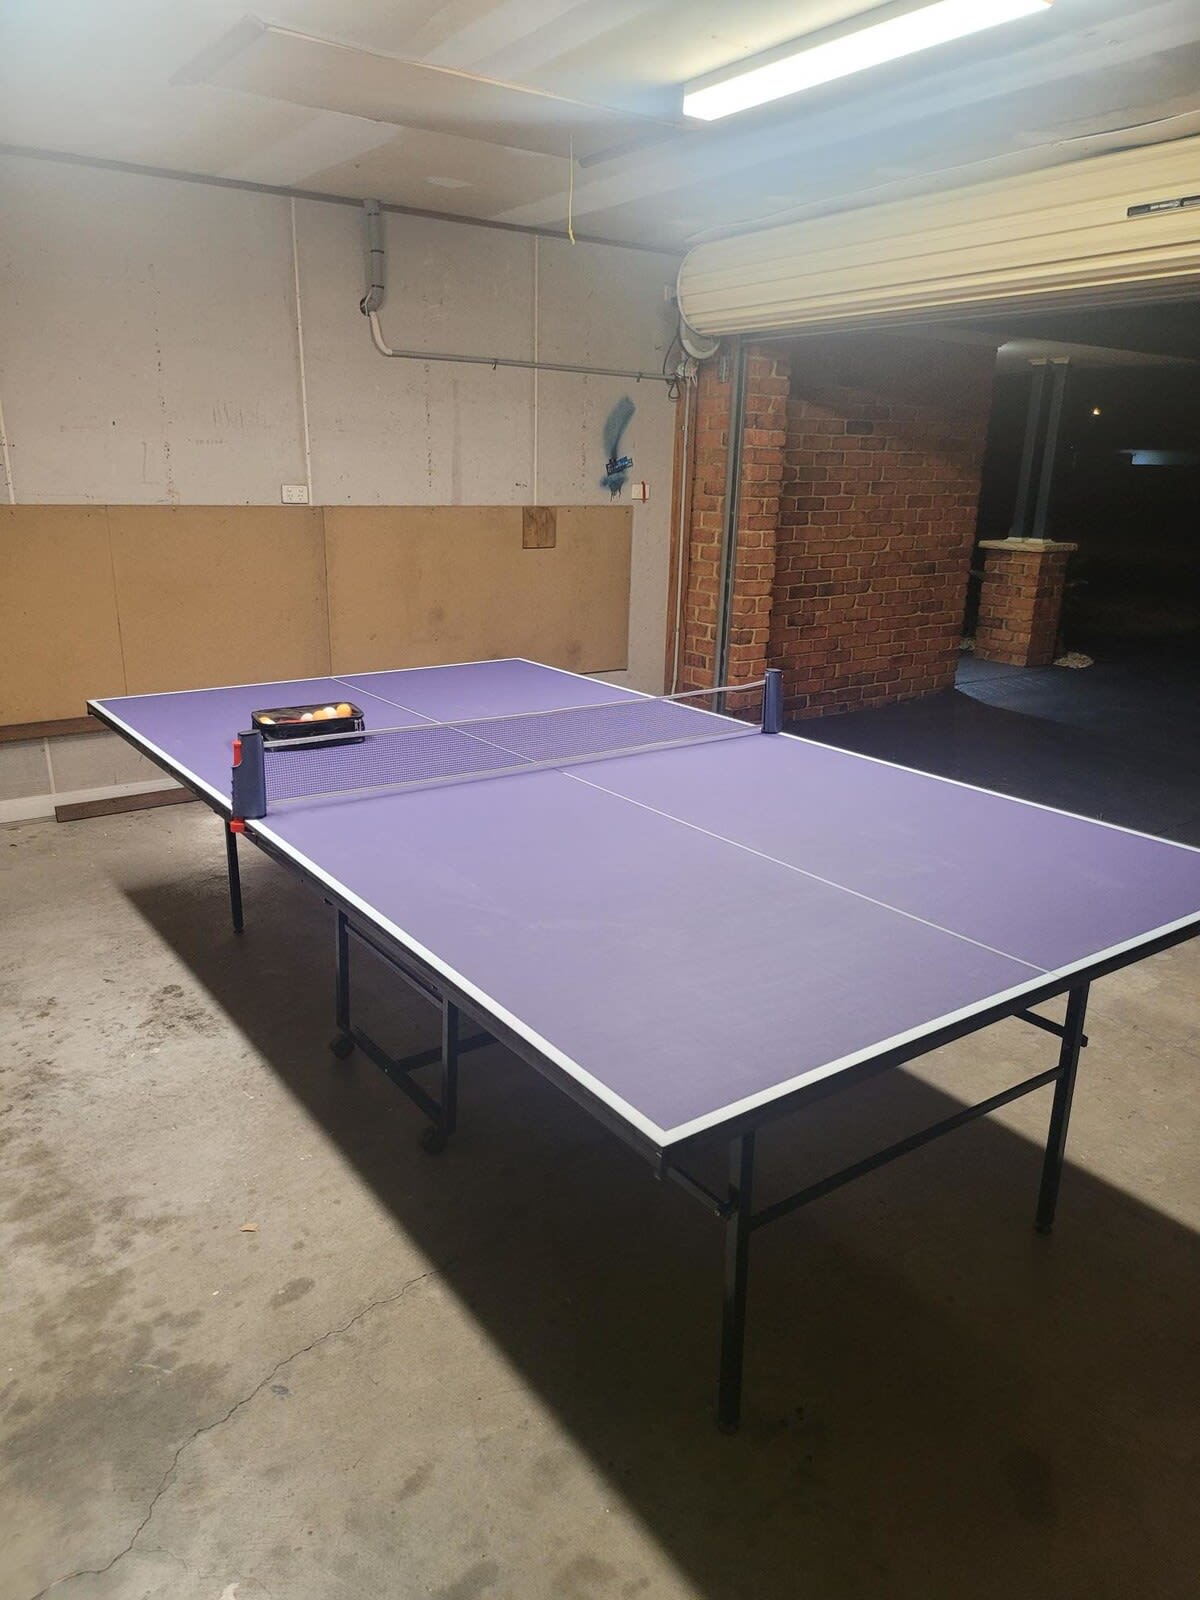 Table Tennis in the Garage